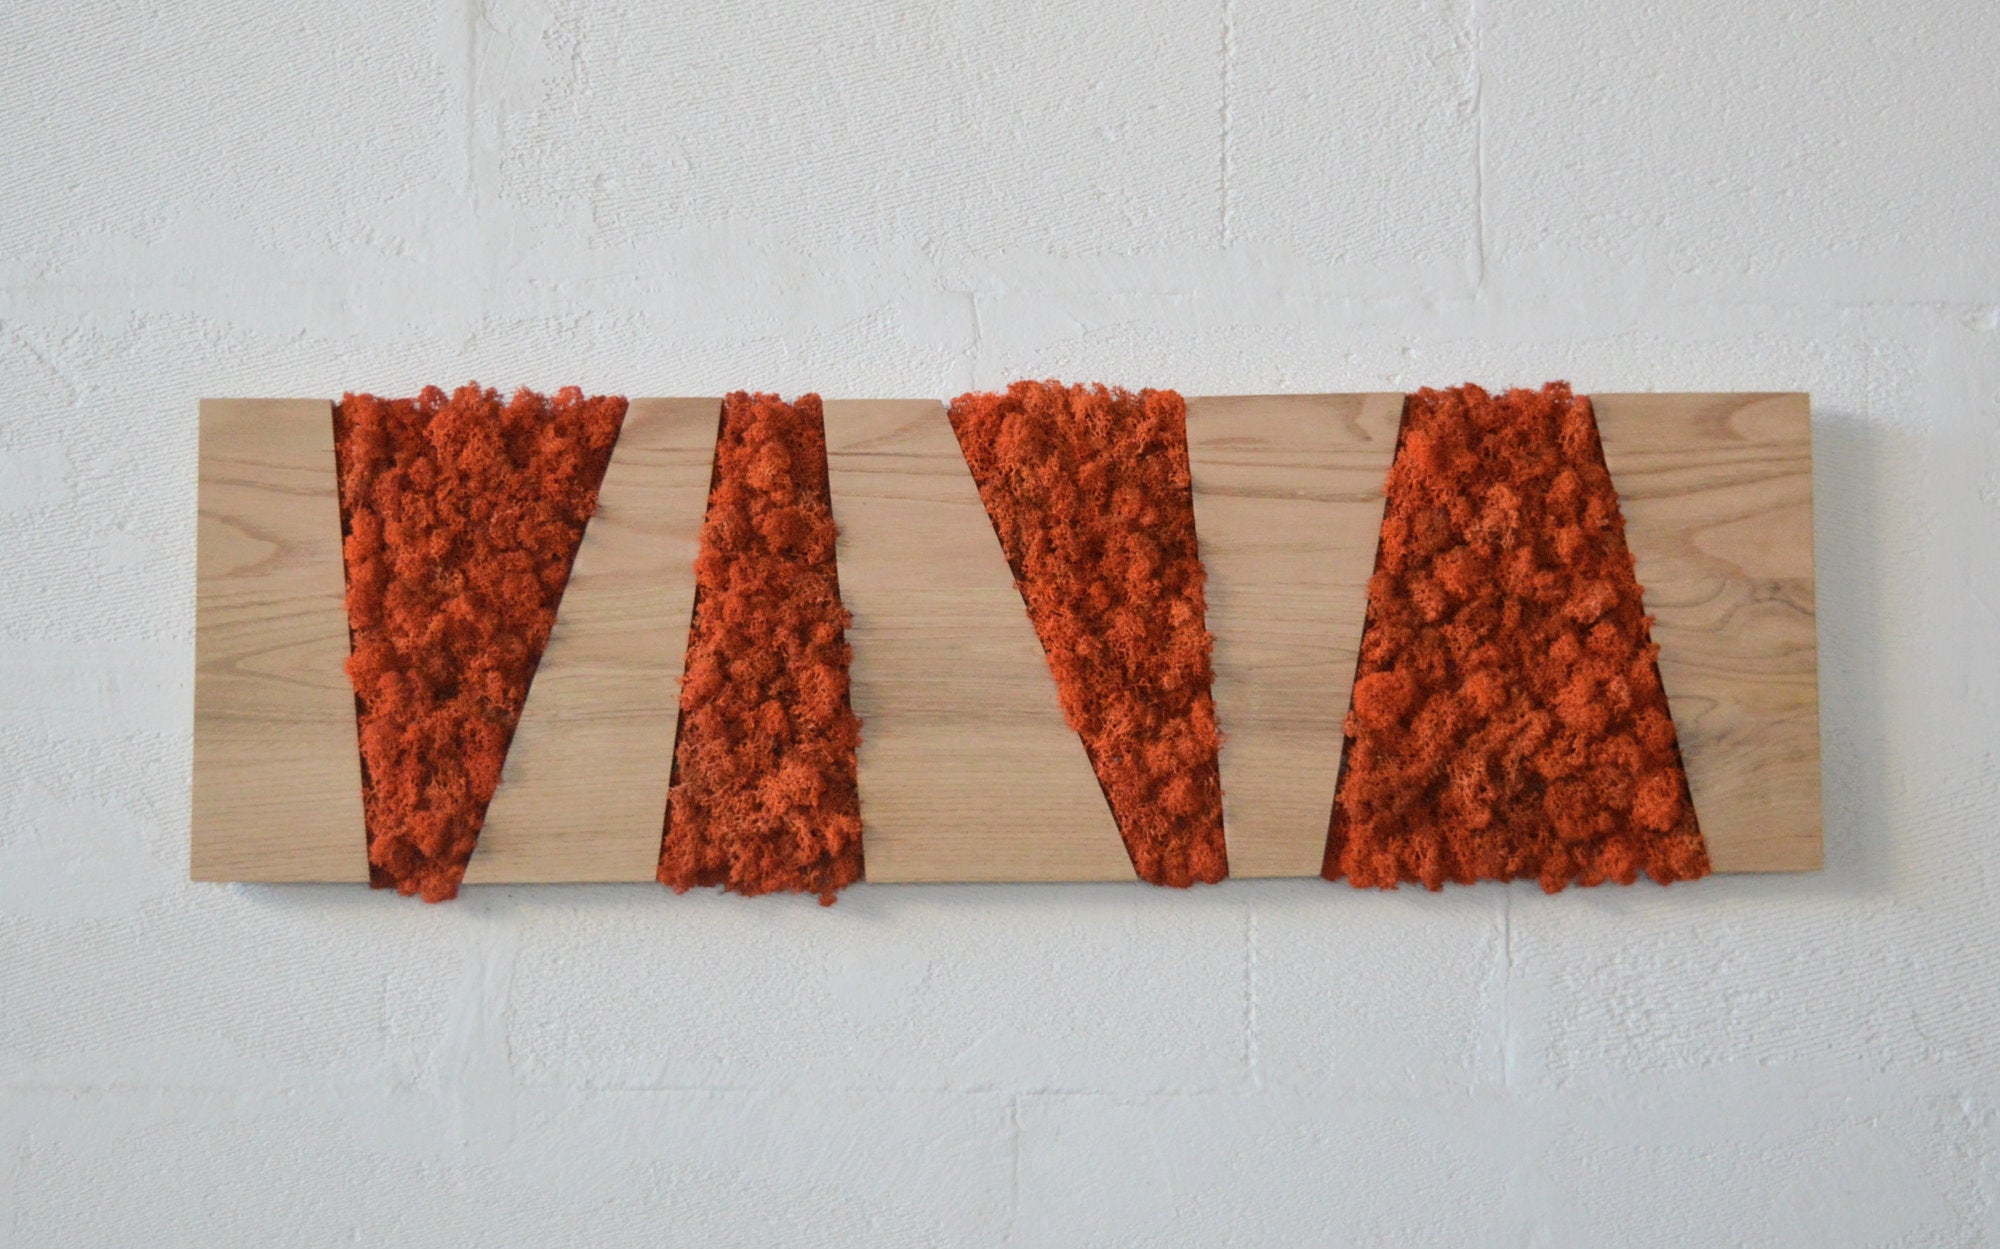 Walnut colored panel, rectangular frame in wood and dehydrated, stabilized orange lichens